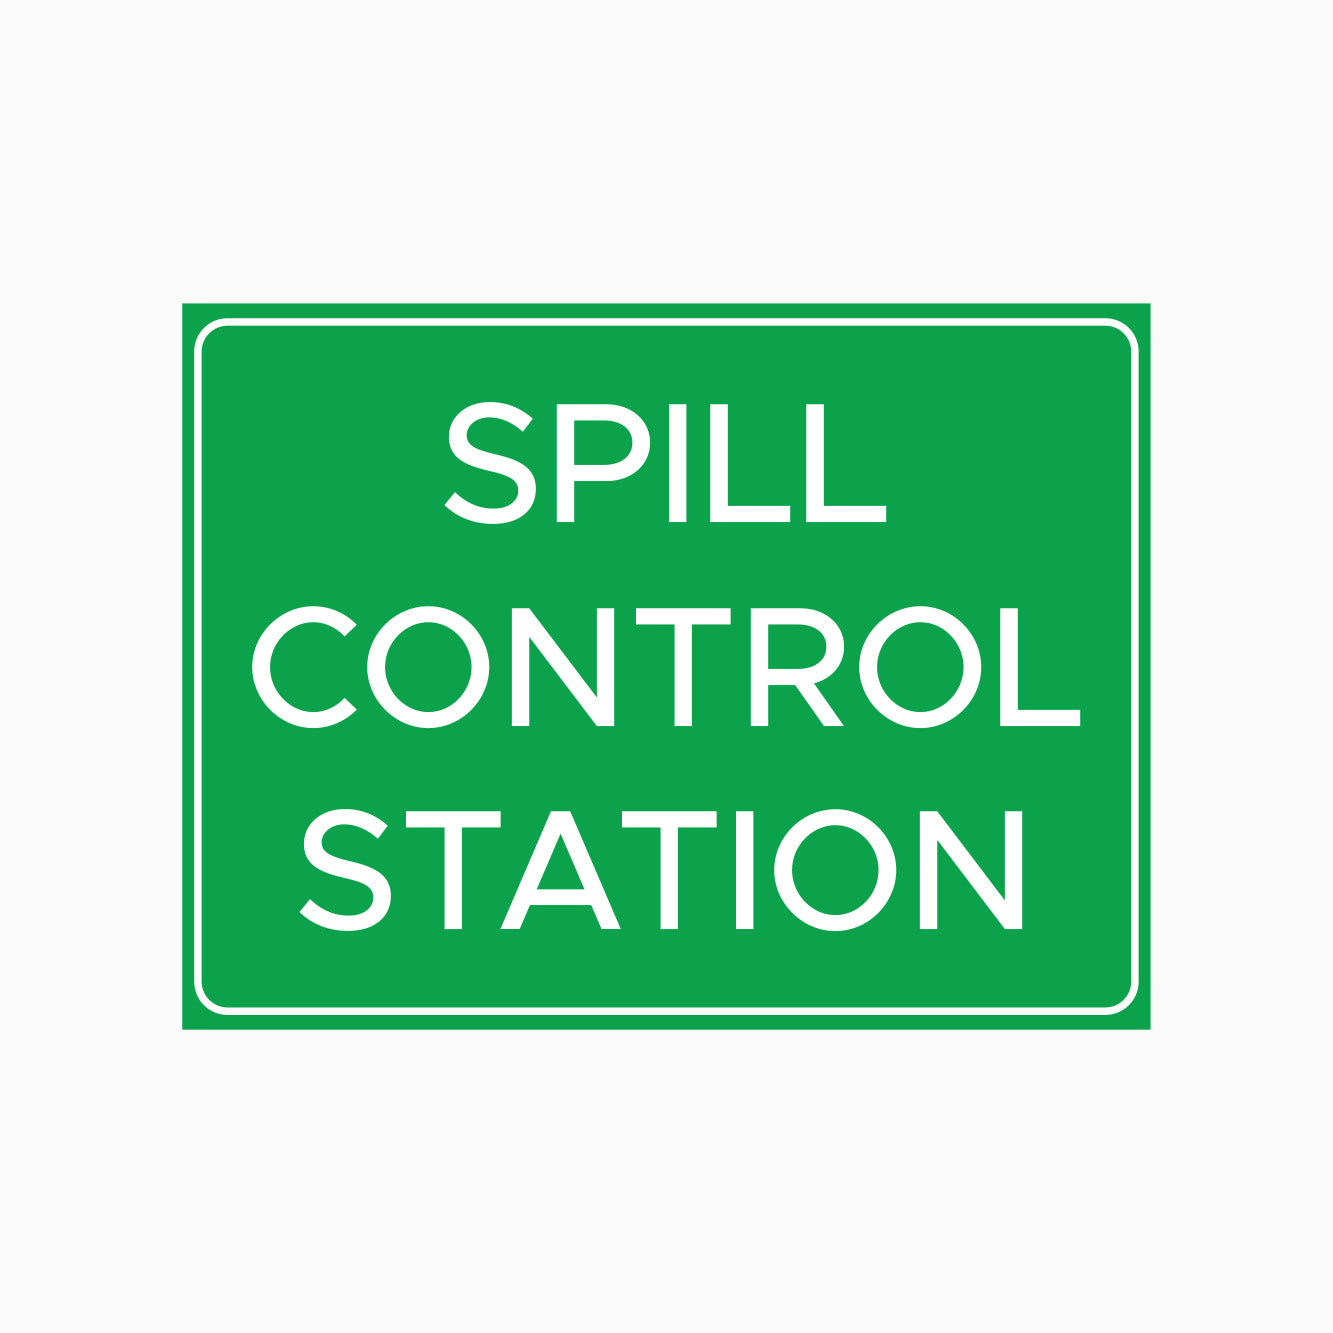 SPILL CONTROL STATION SIGN 